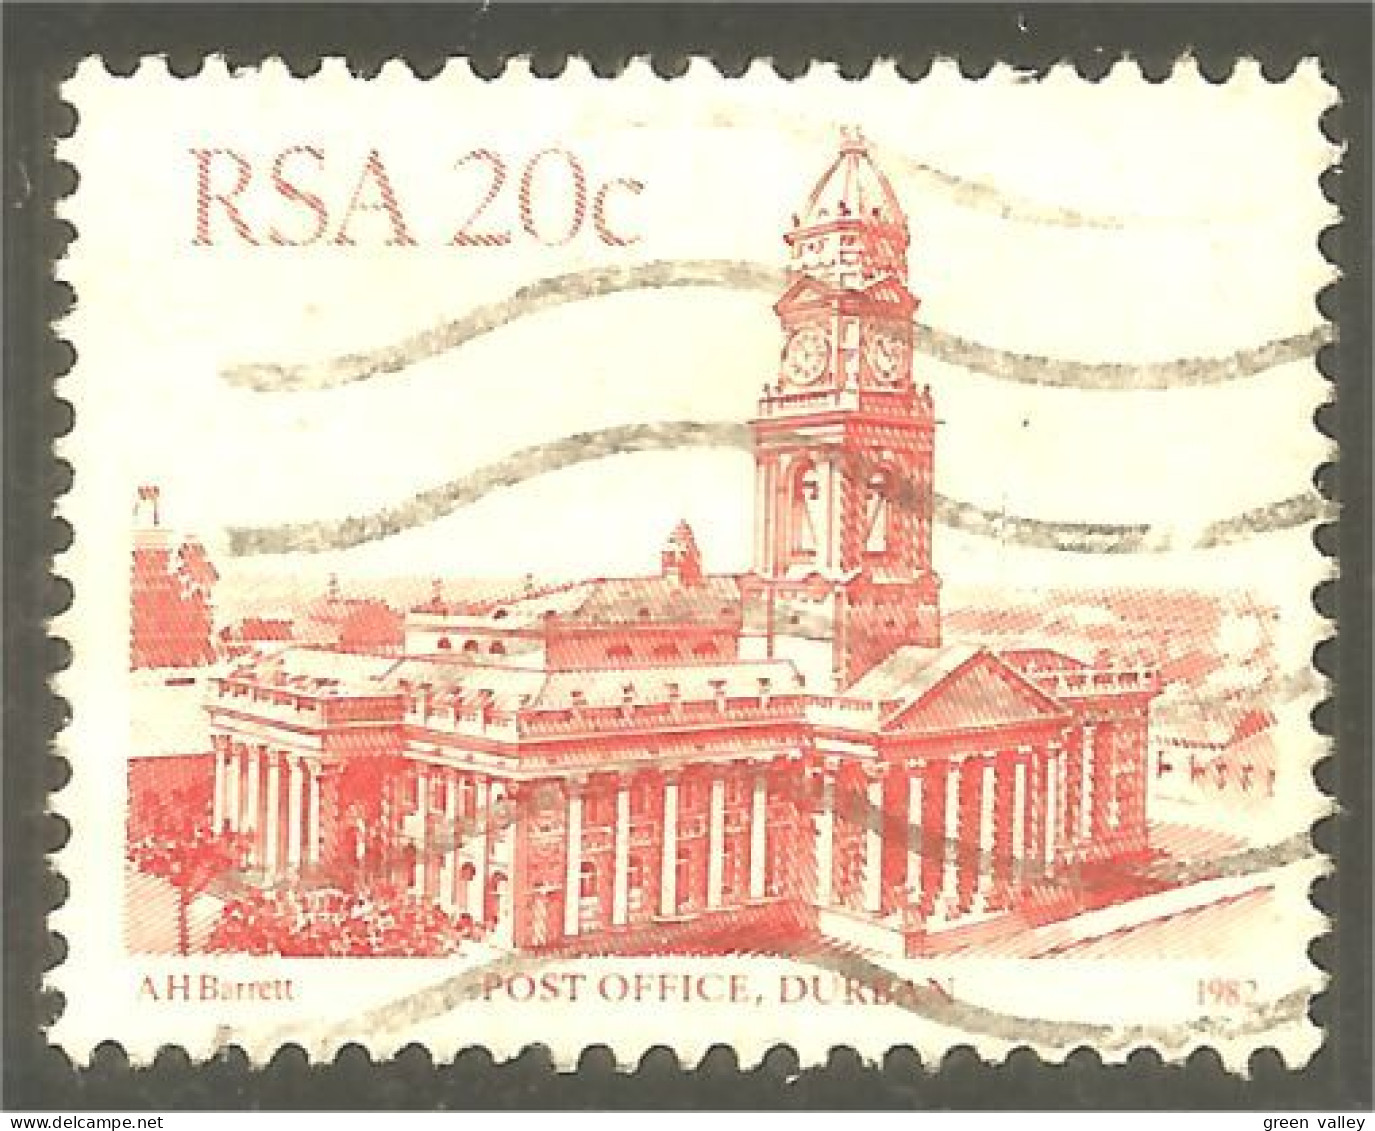 XW01-1256 South Africa Durban Post Office Bureau Postes - Used Stamps